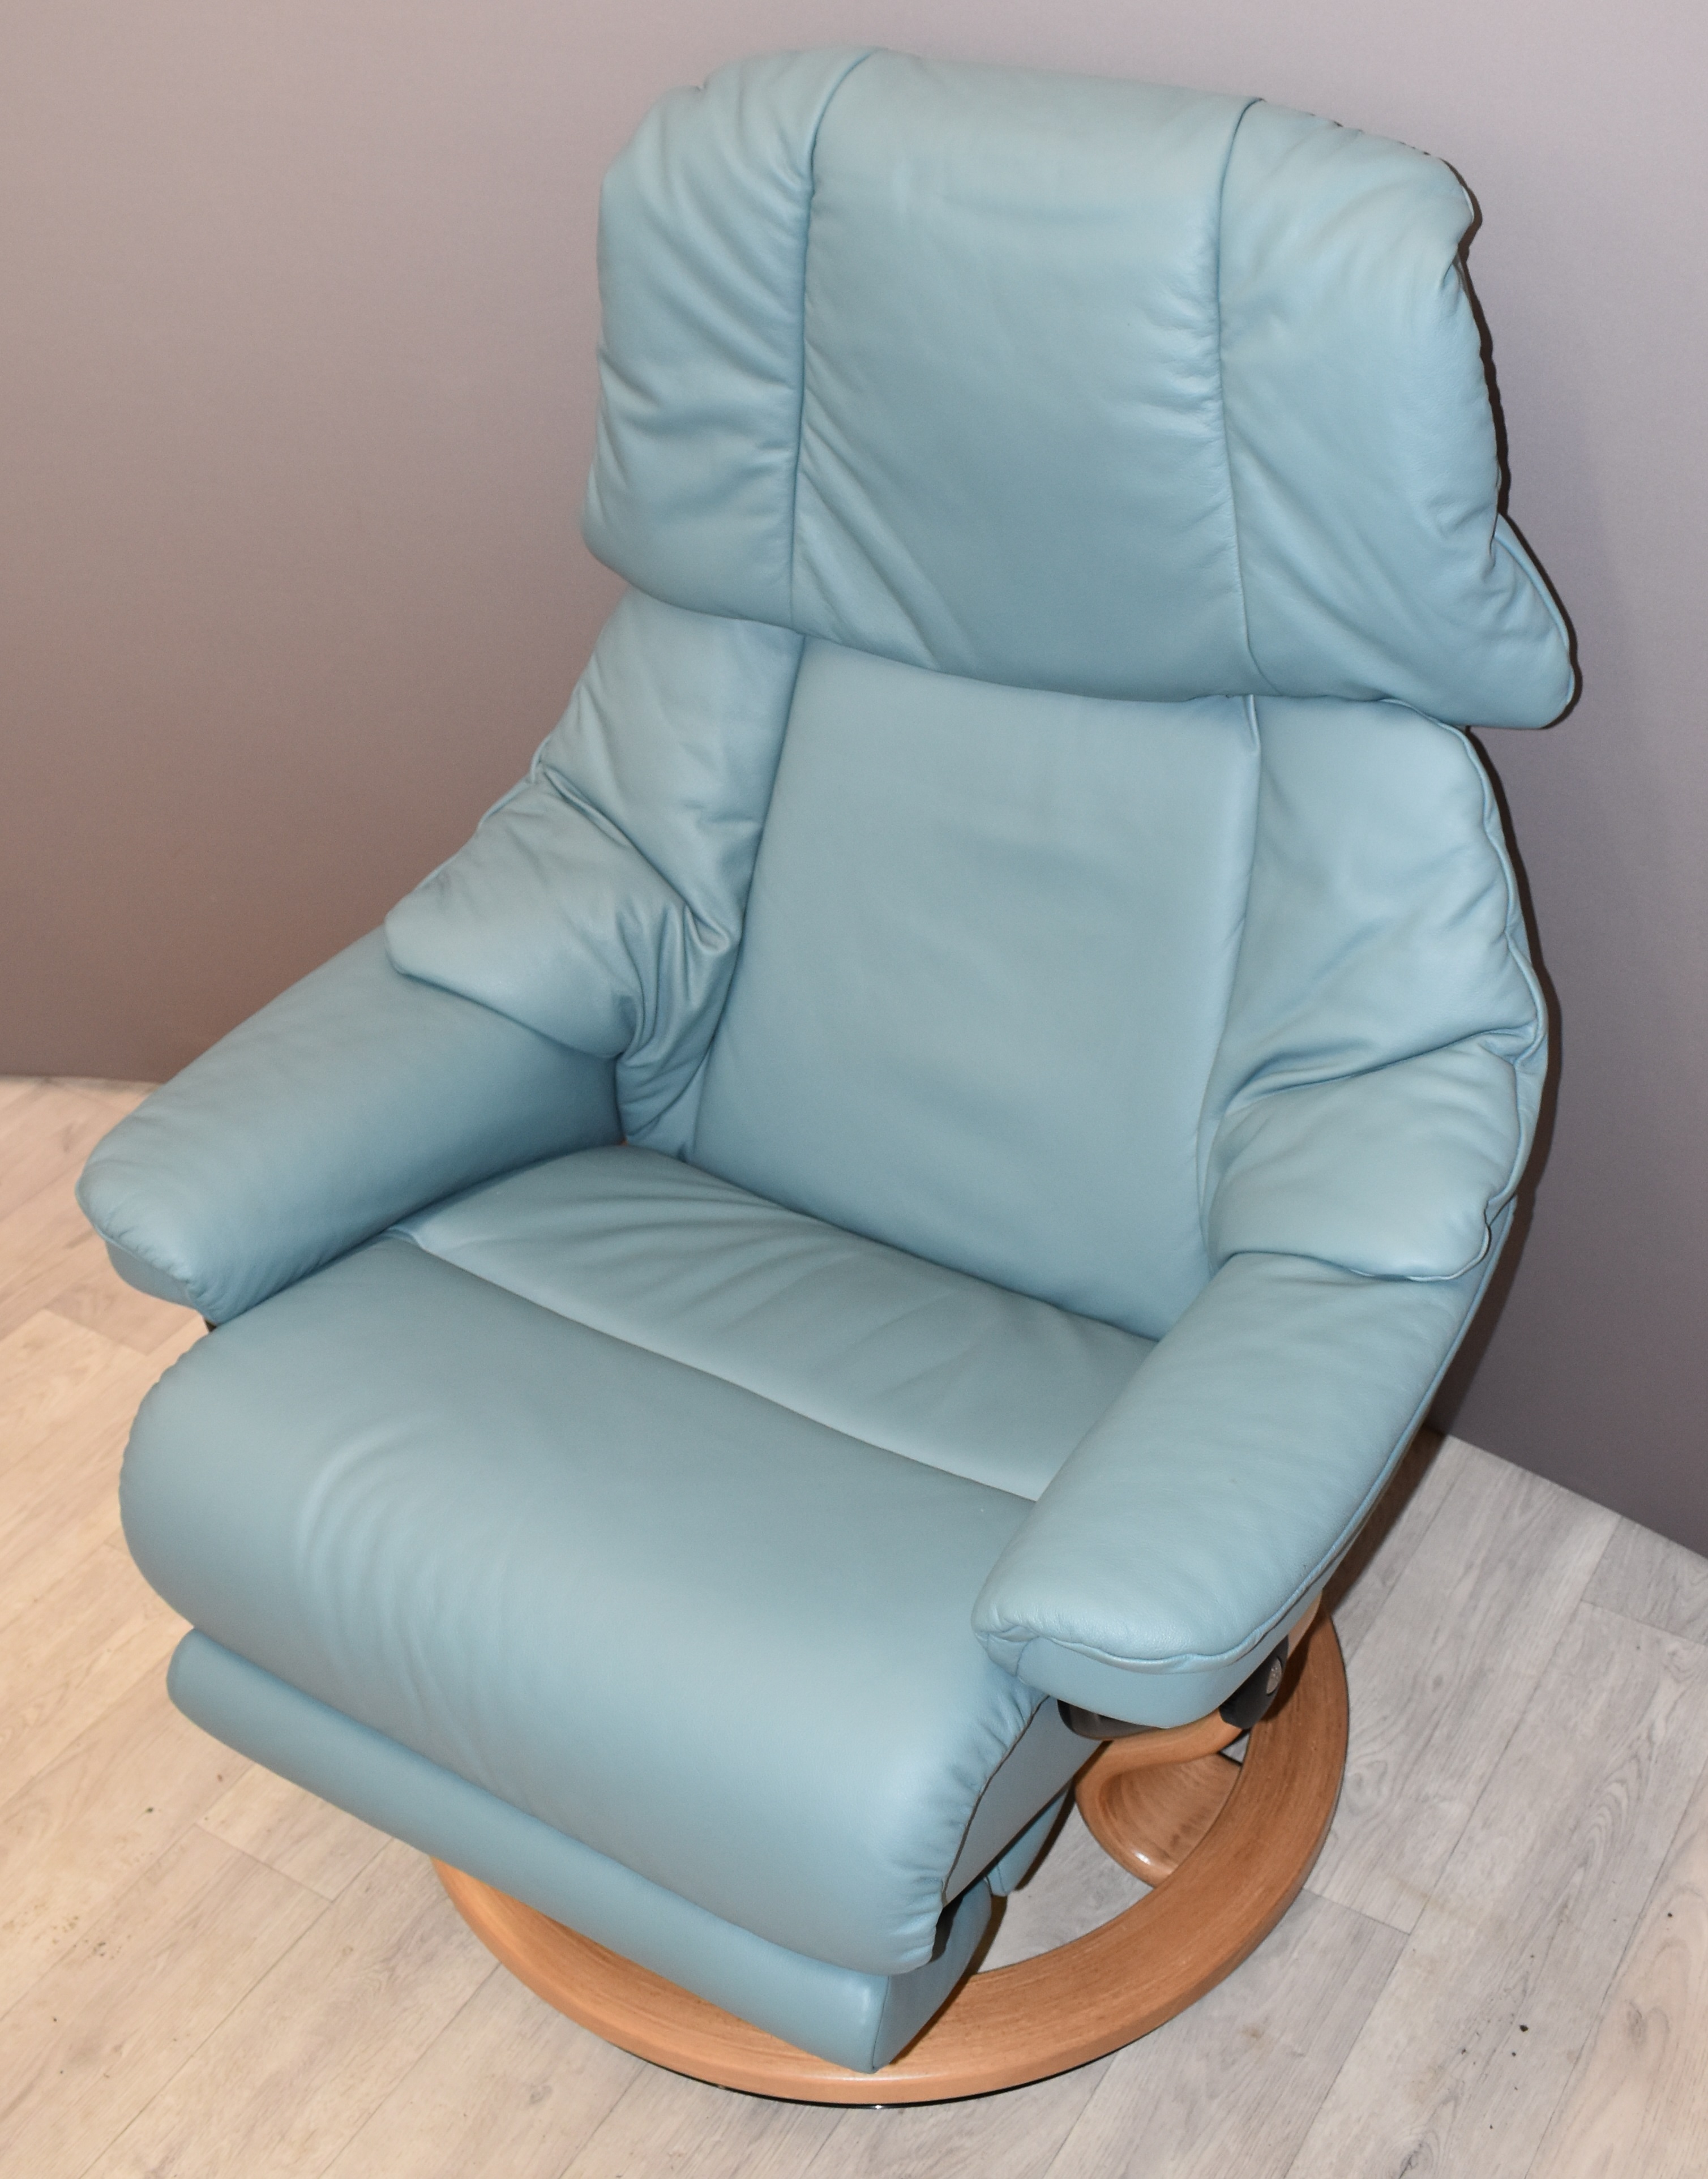 Stressless powered recliner armchair in blue, with power lead/adaptor - Image 2 of 3